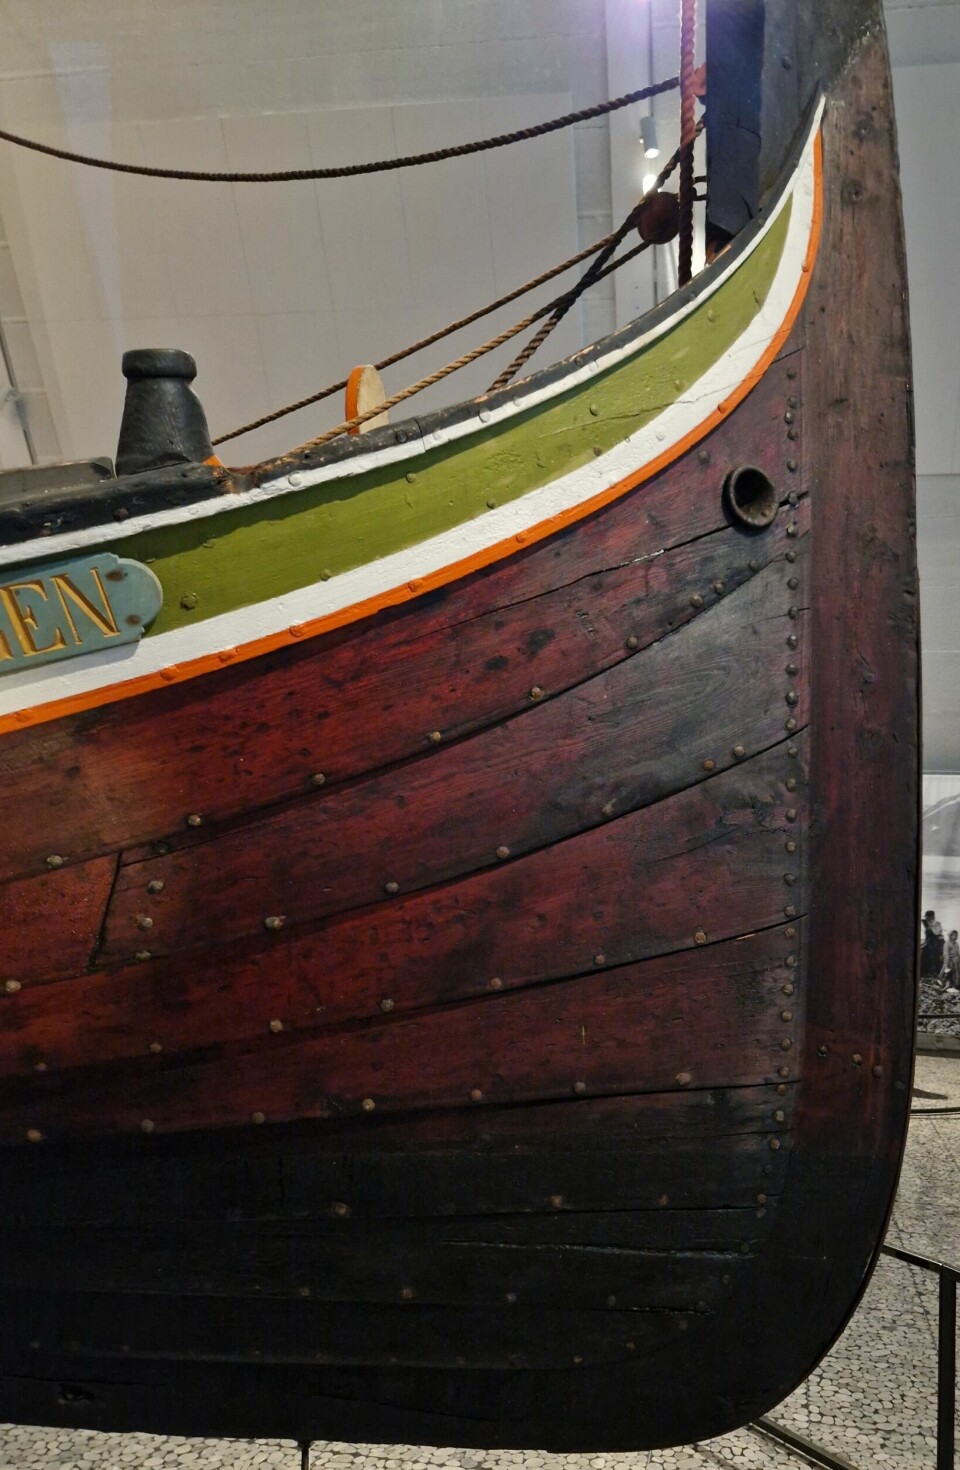 The Nordland boat is built using the same method as the Vikings: the clinker or lapstrake method.